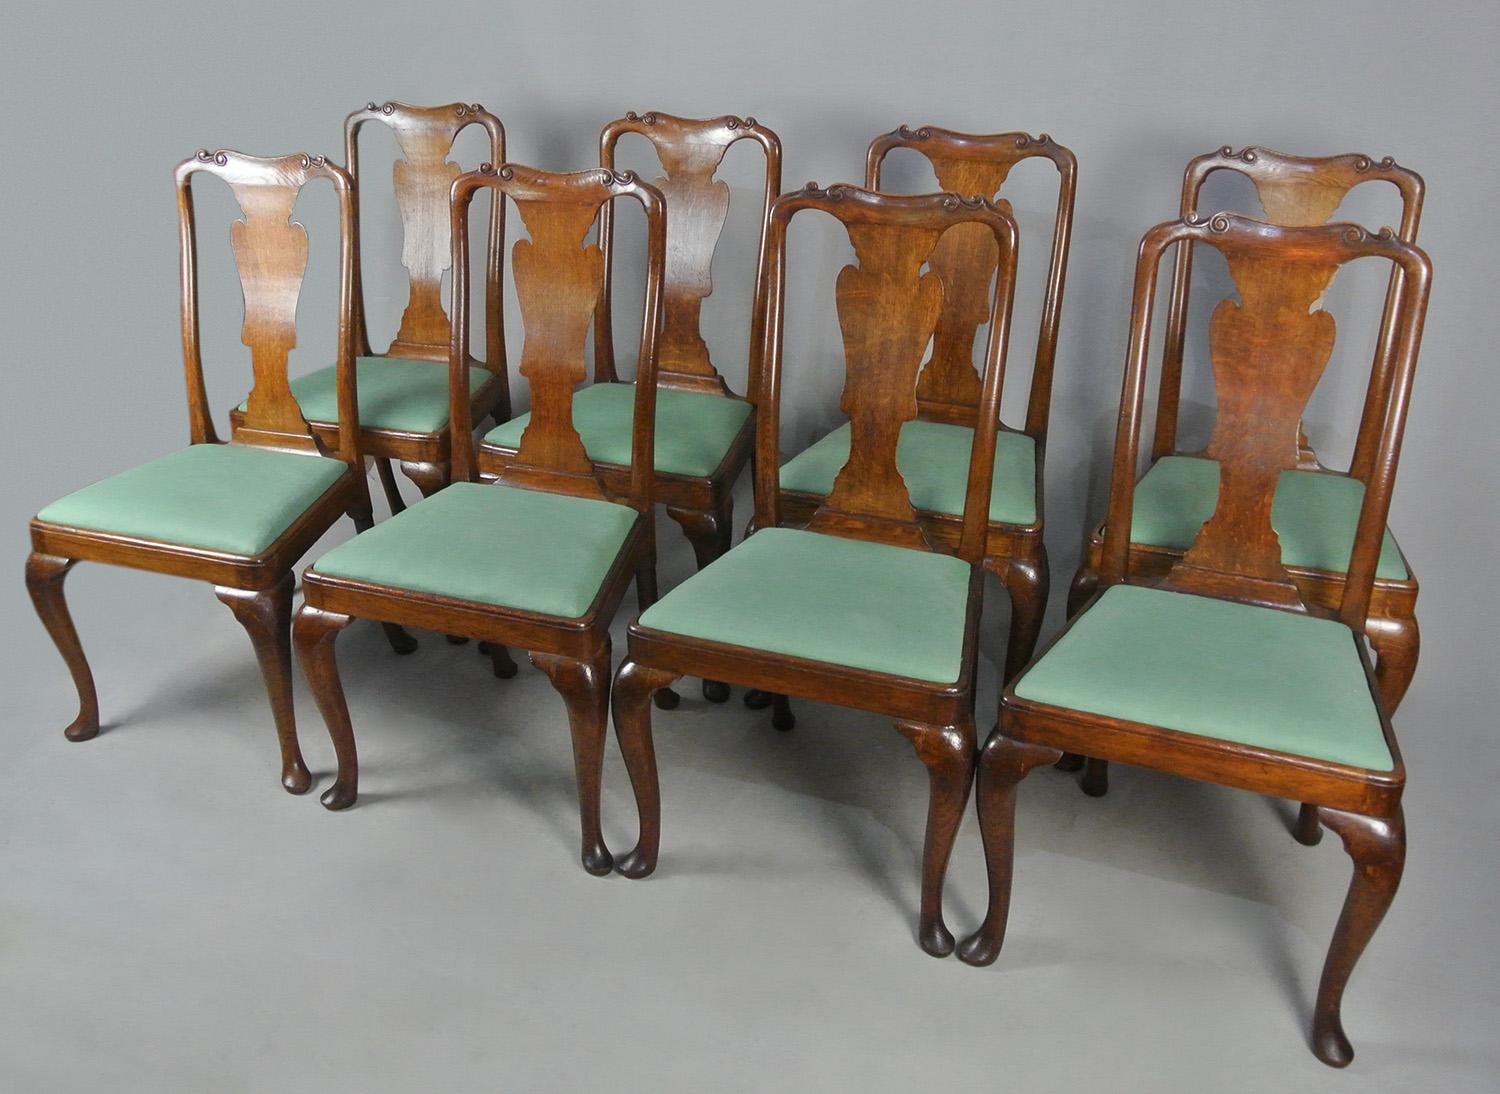 A beautiful set of chairs in solid oak, heavy and very solid and robust without weakness in the joints or repairs.  These date from c. 1900 but were made in the style of a set of chairs of 1720 with long cabriole legs, shapely curved back splats and